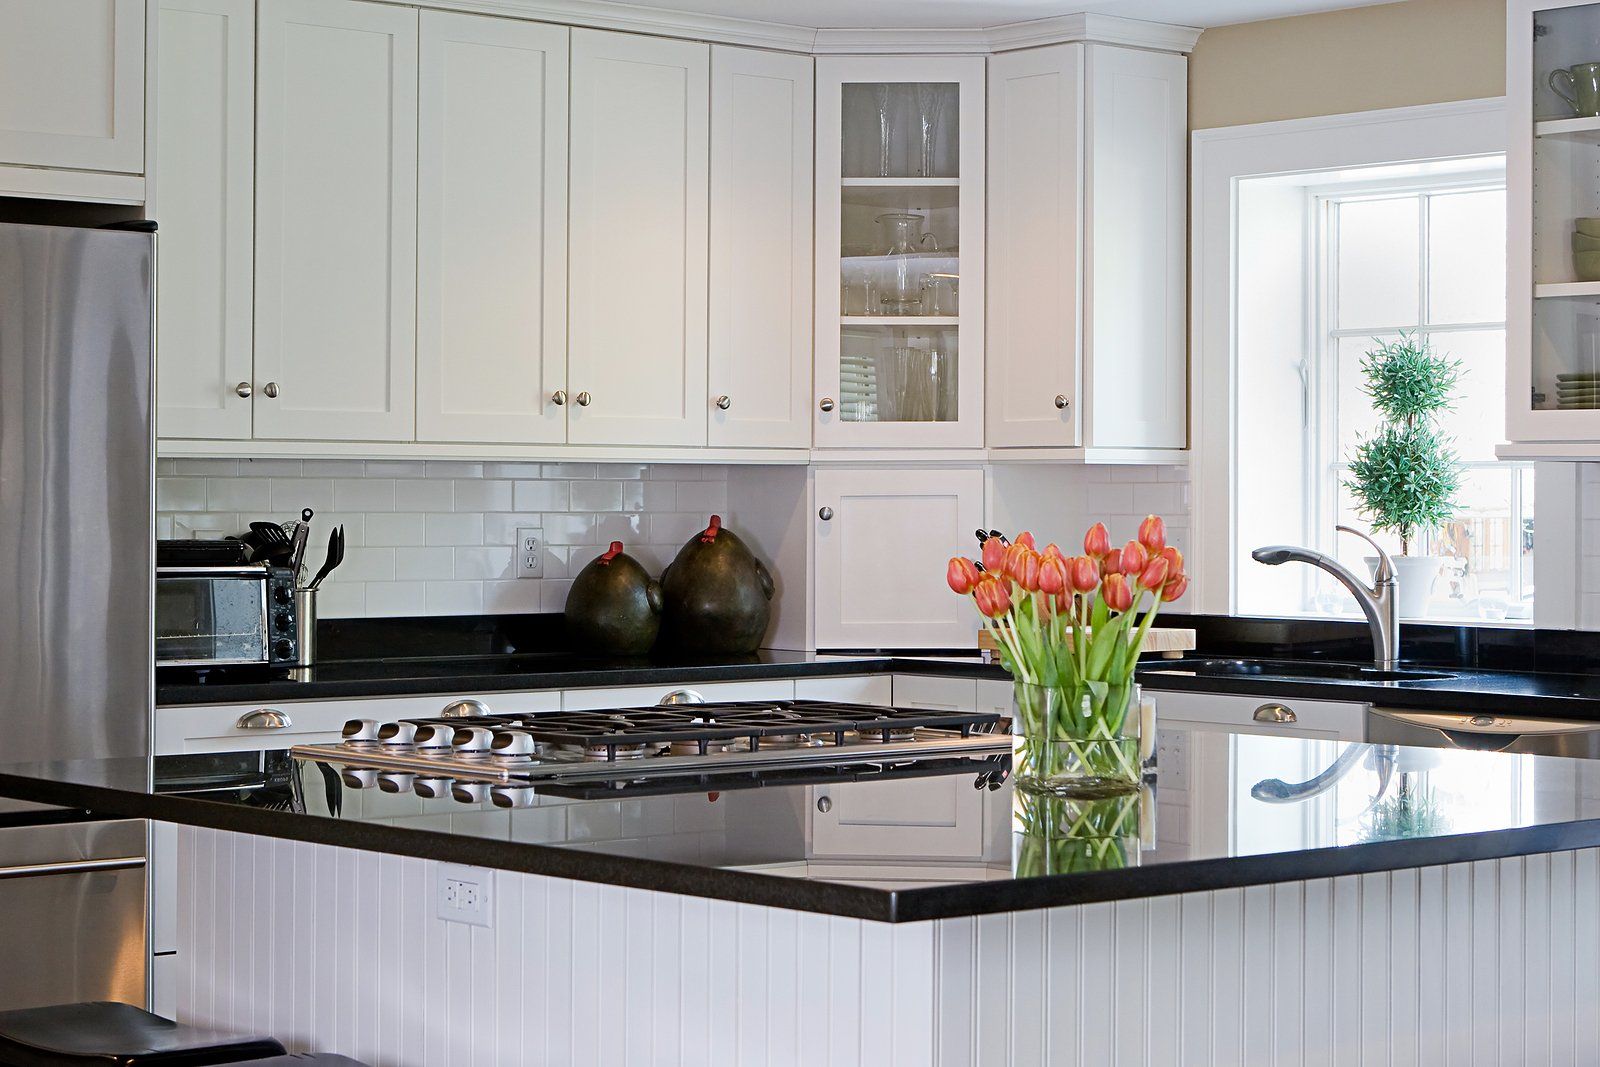 Cabinet Installation Services in Henderson, NC